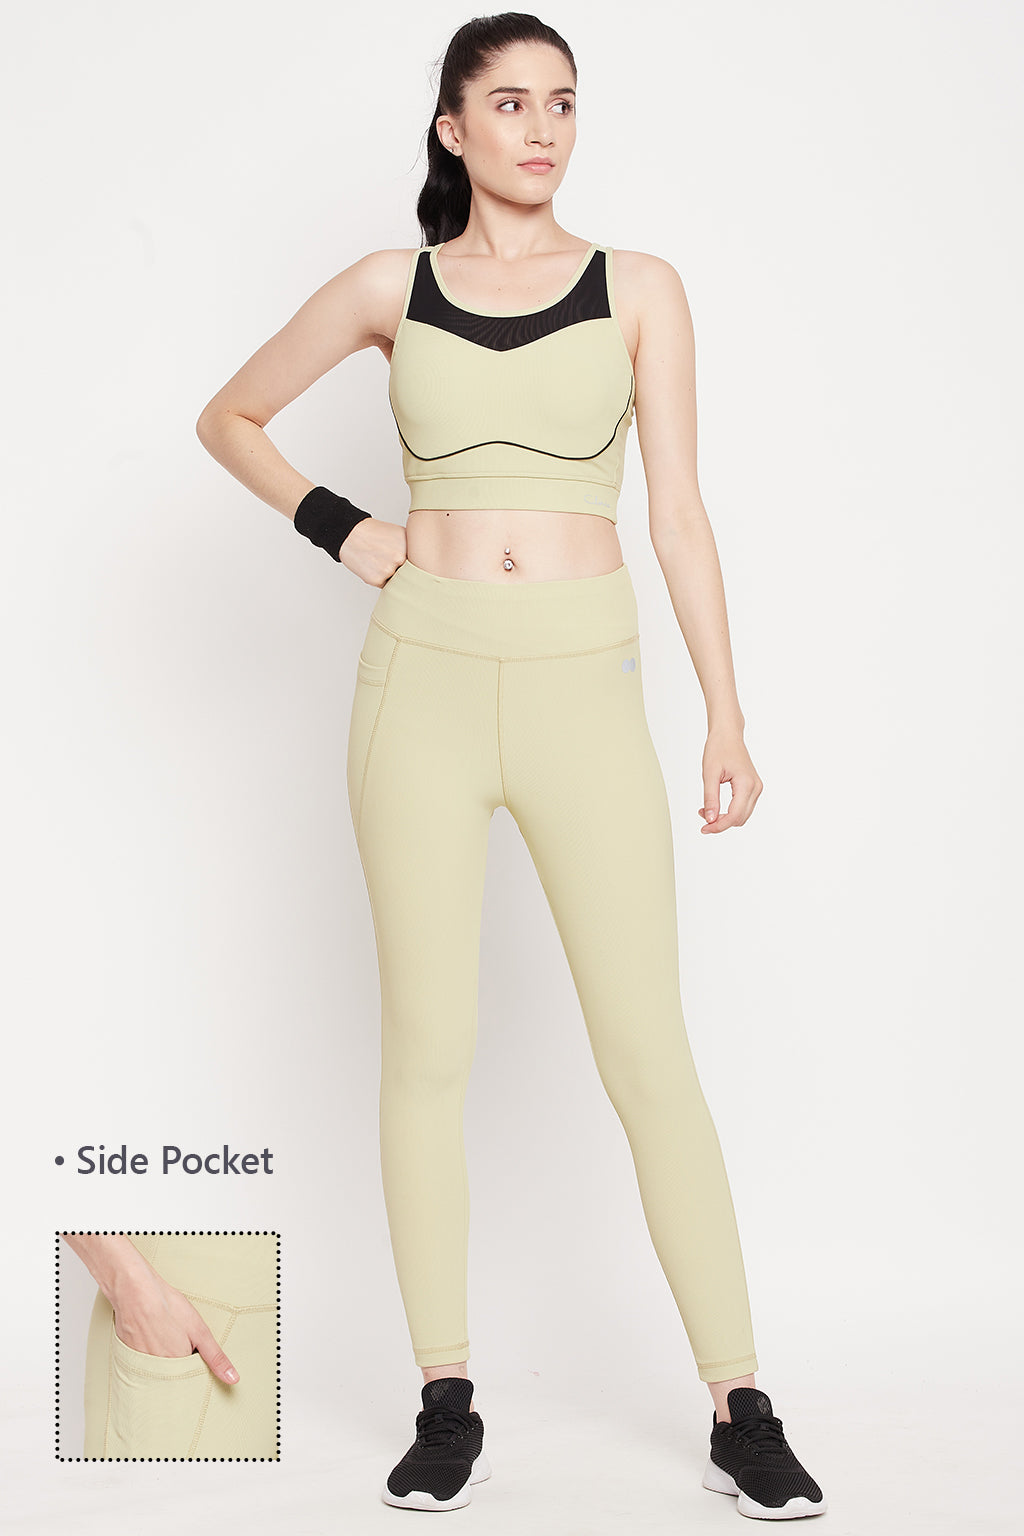 Activewear Ankle Length Tights in Sage Green – Tradyl